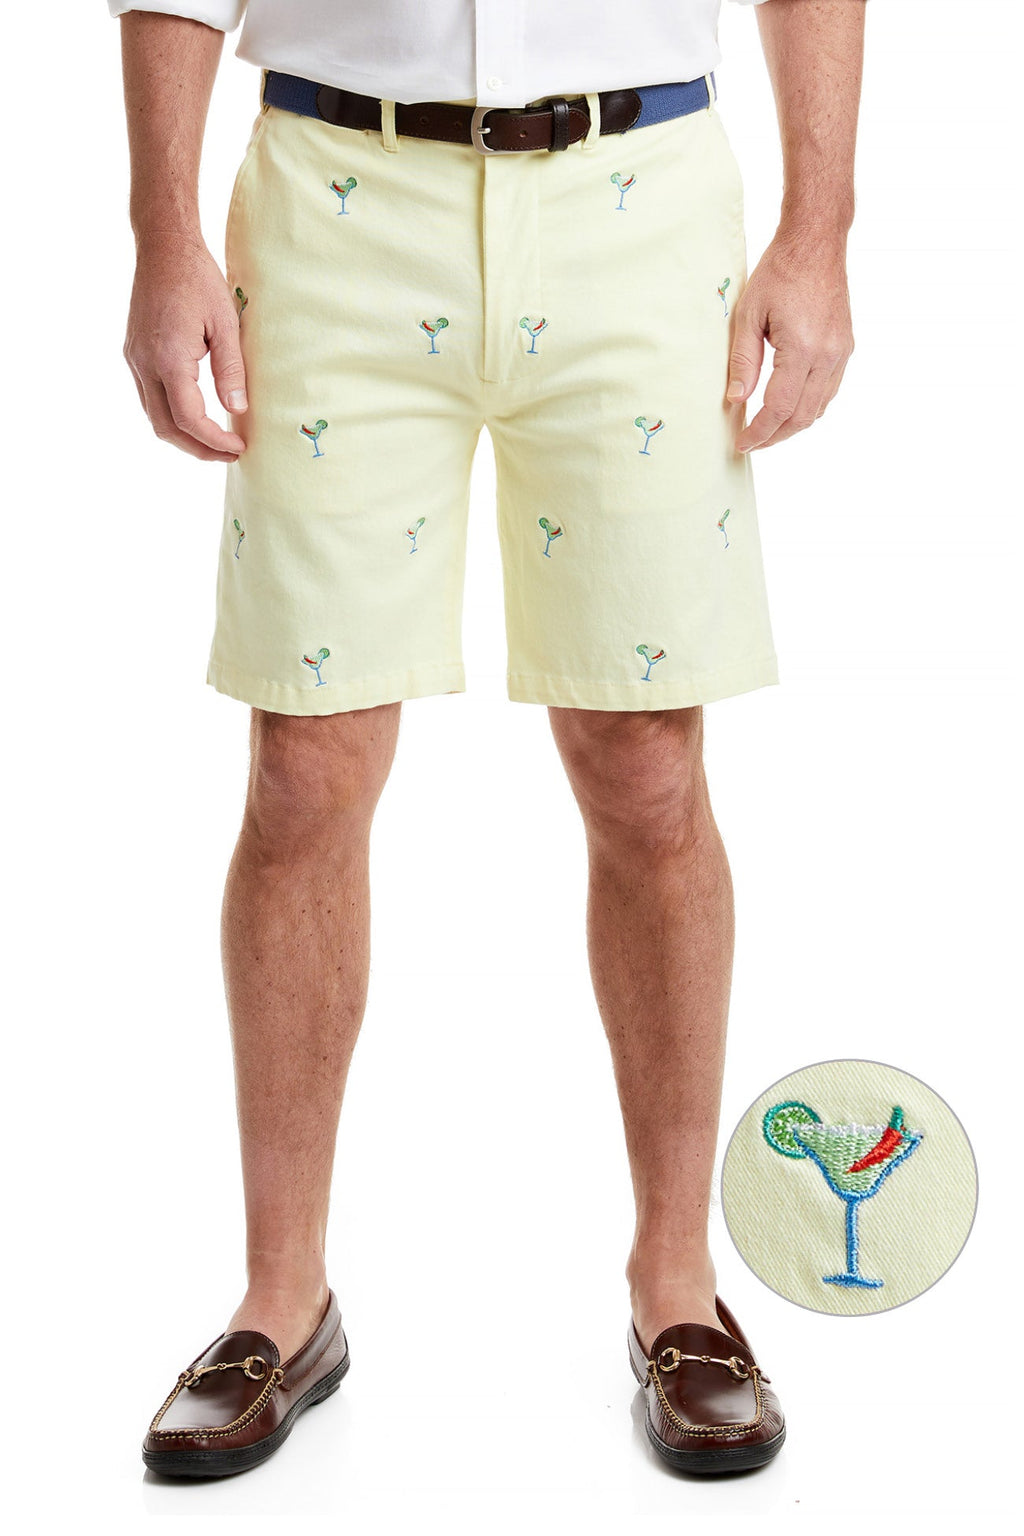 Cisco Short Neon Yellow with Spicy Margarita MENS EMBROIDERED SHORTS Castaway Nantucket Island